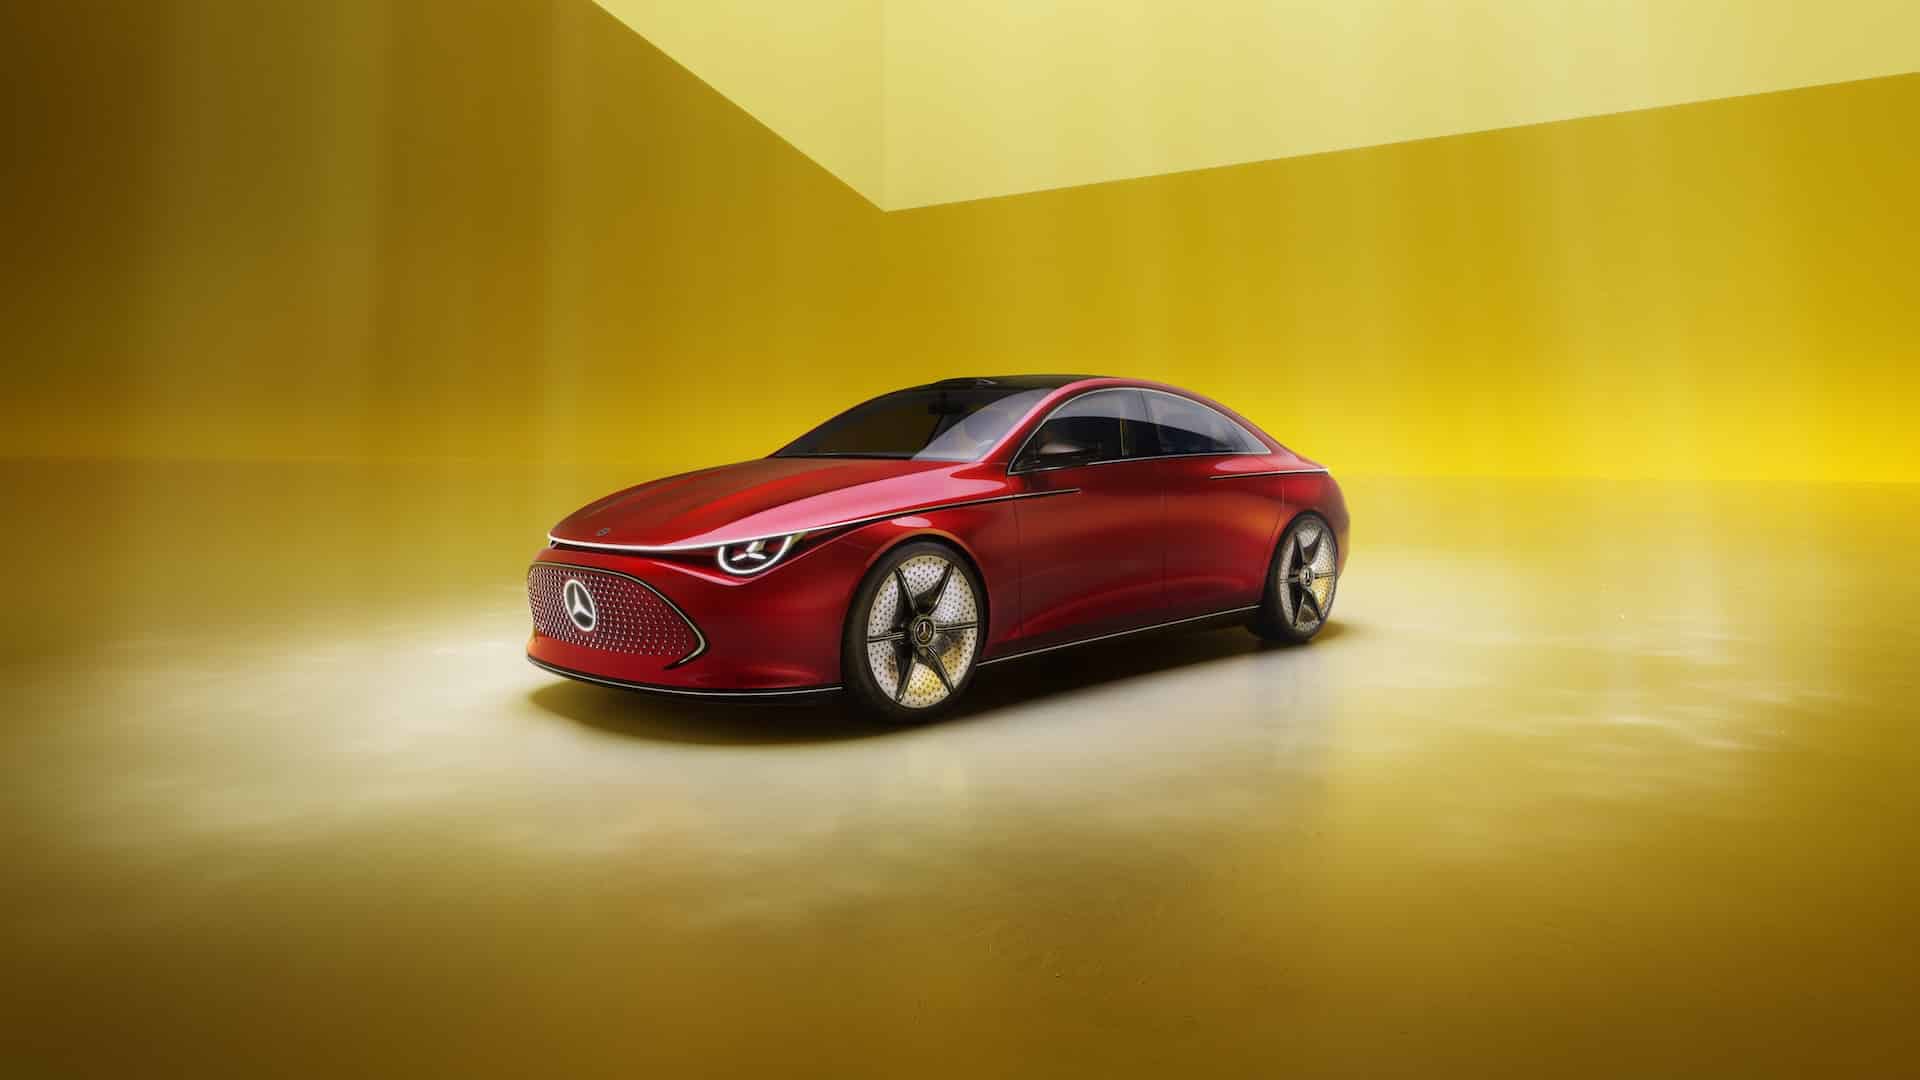 Next-Generation Electric Concept CLA Class Revealed by Mercedes-Benz